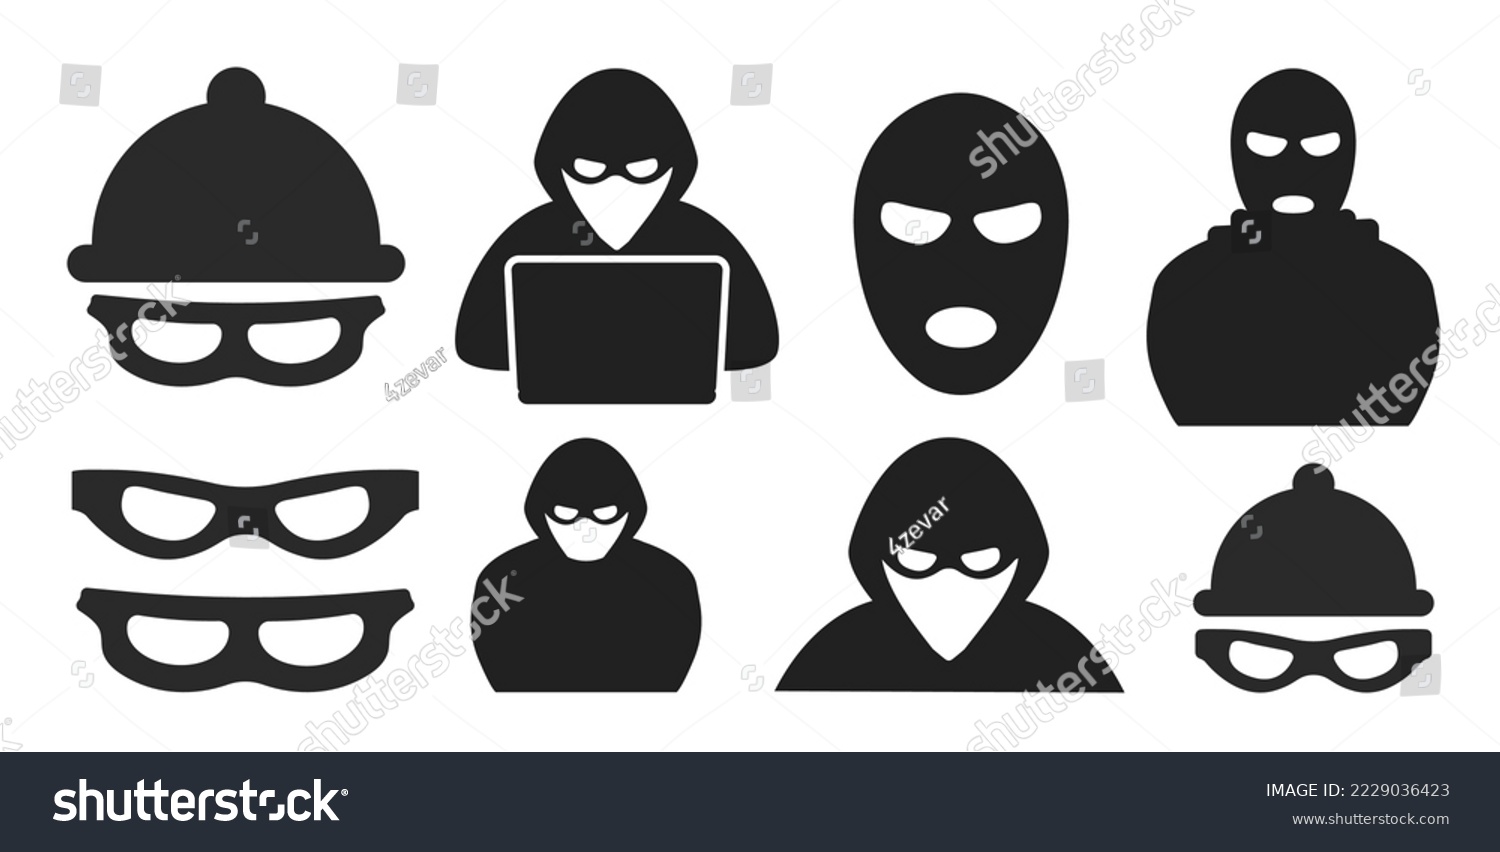 Thief with cap icon. Criminal, robber icon #2229036423